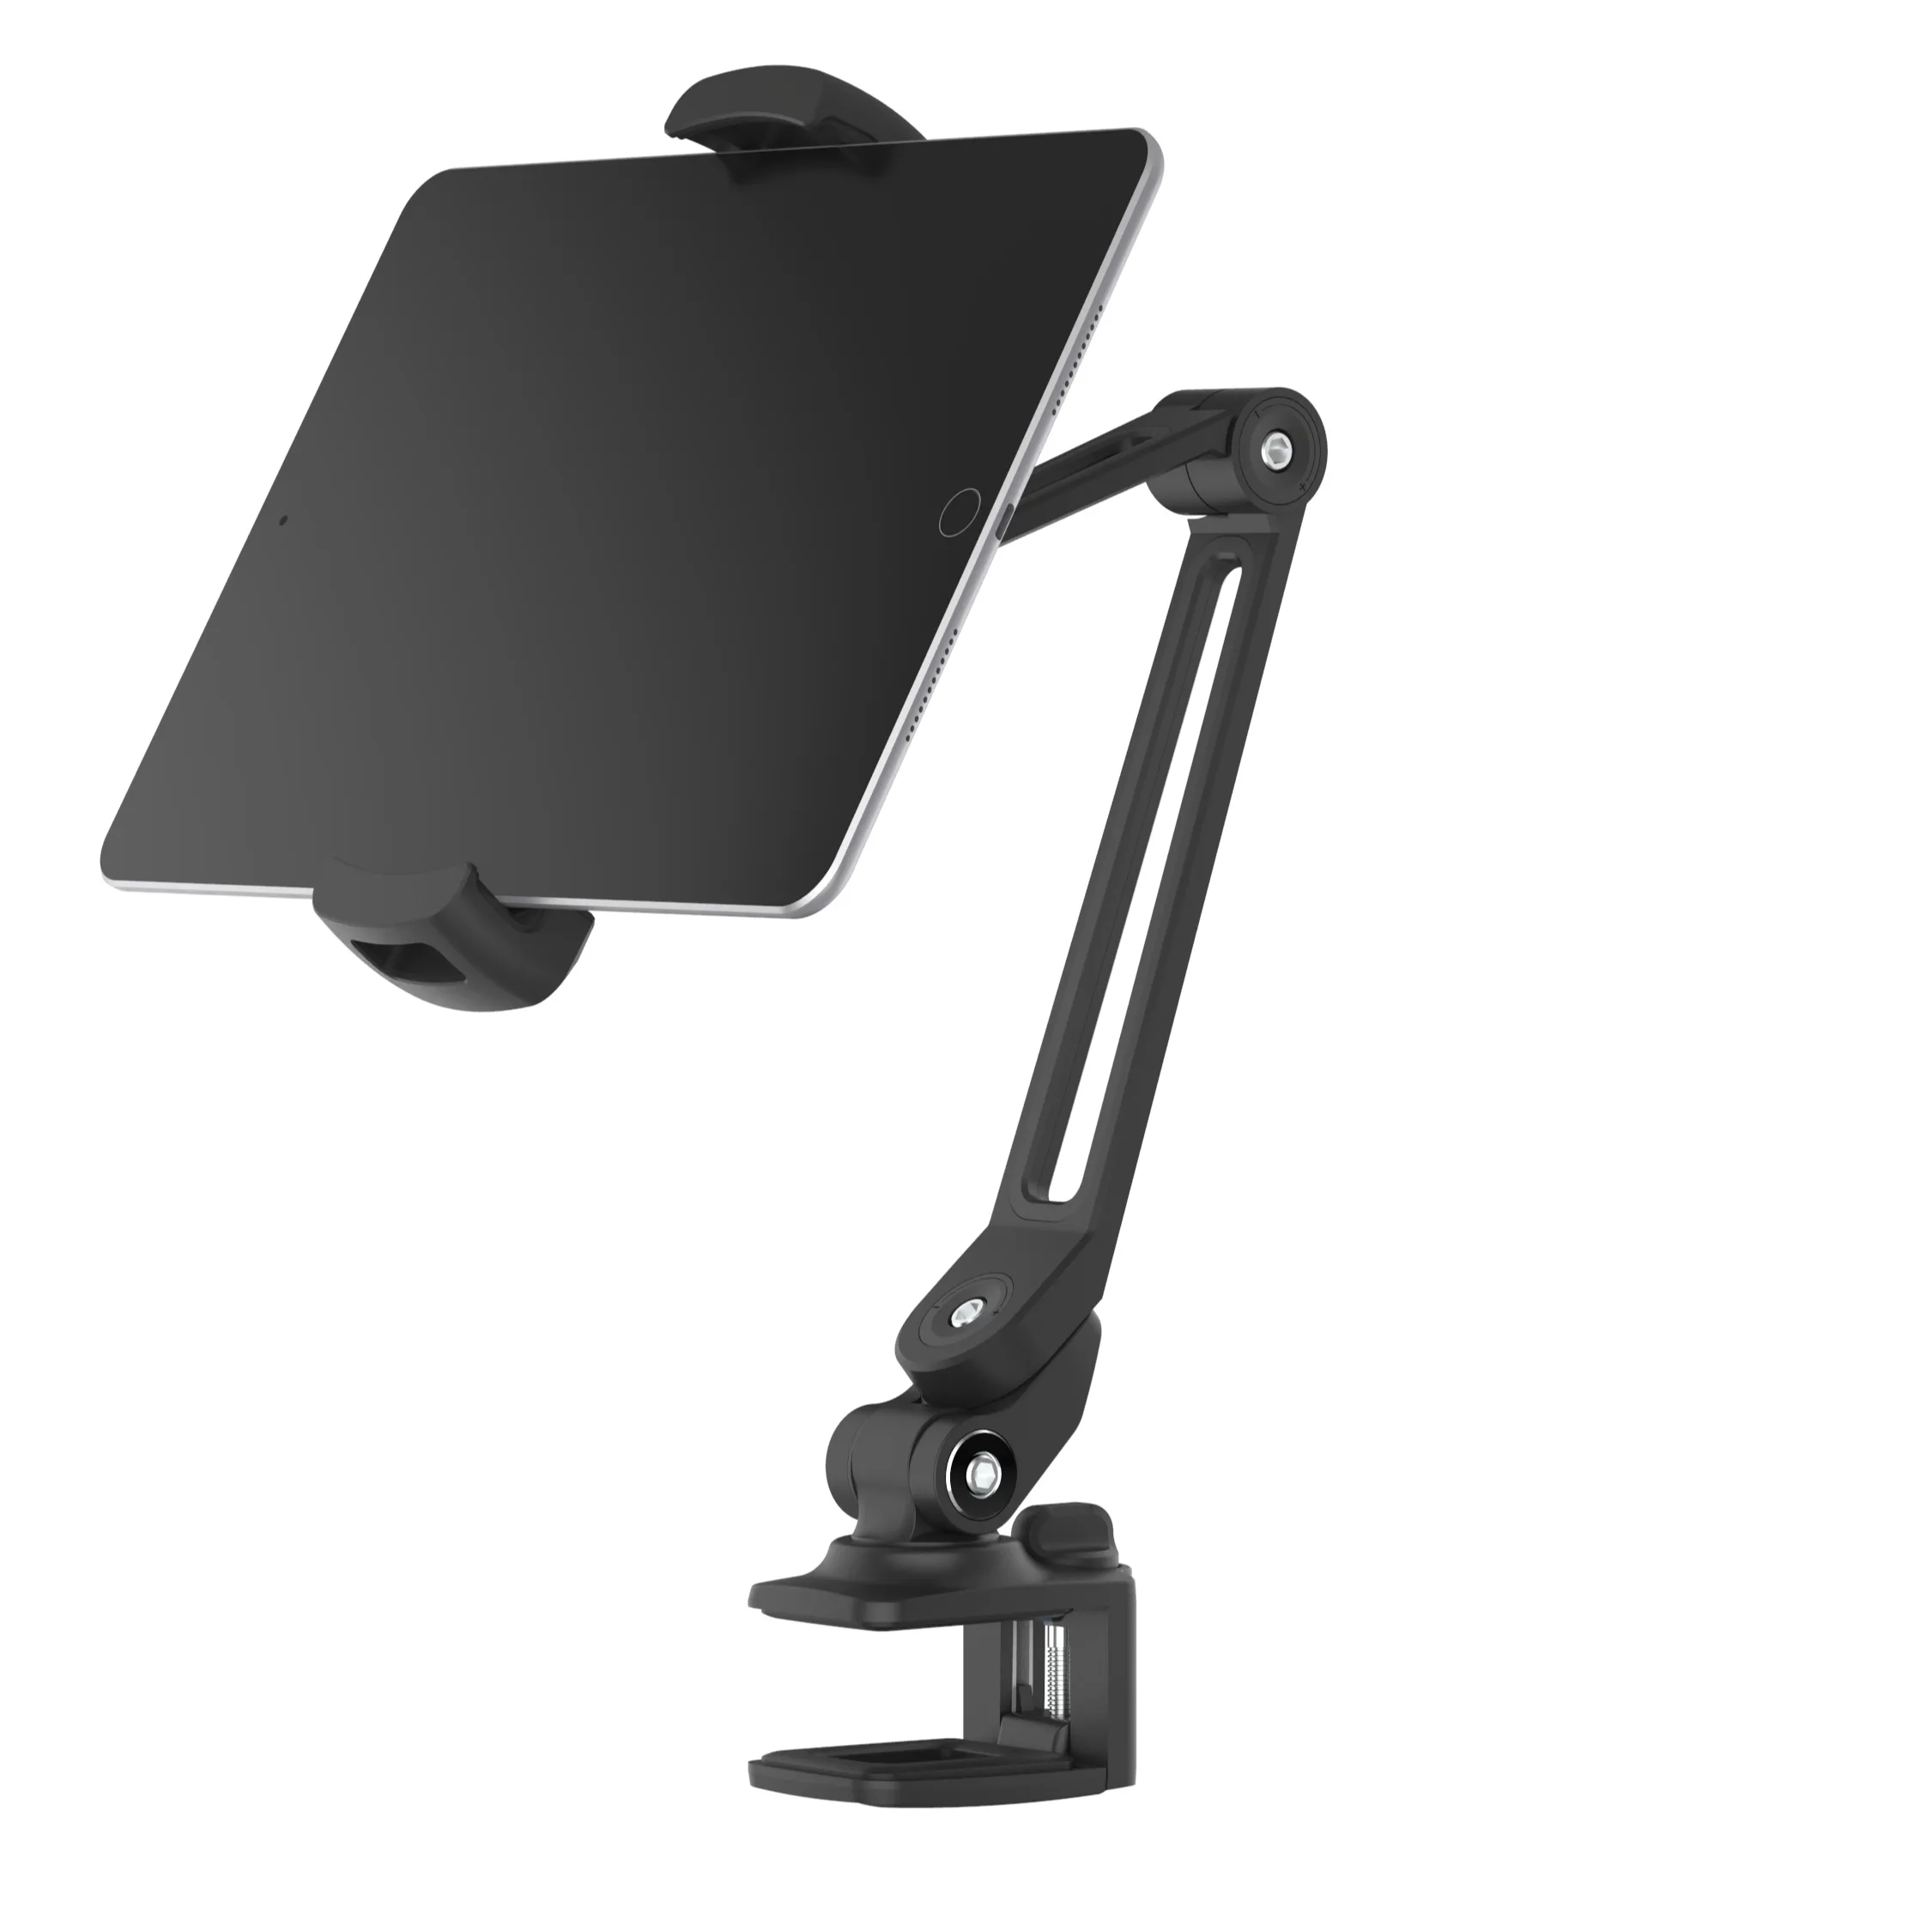 Universal clamp base long arm aluminum adjustable tablet holder phone mount phone accessories pad holder good quality